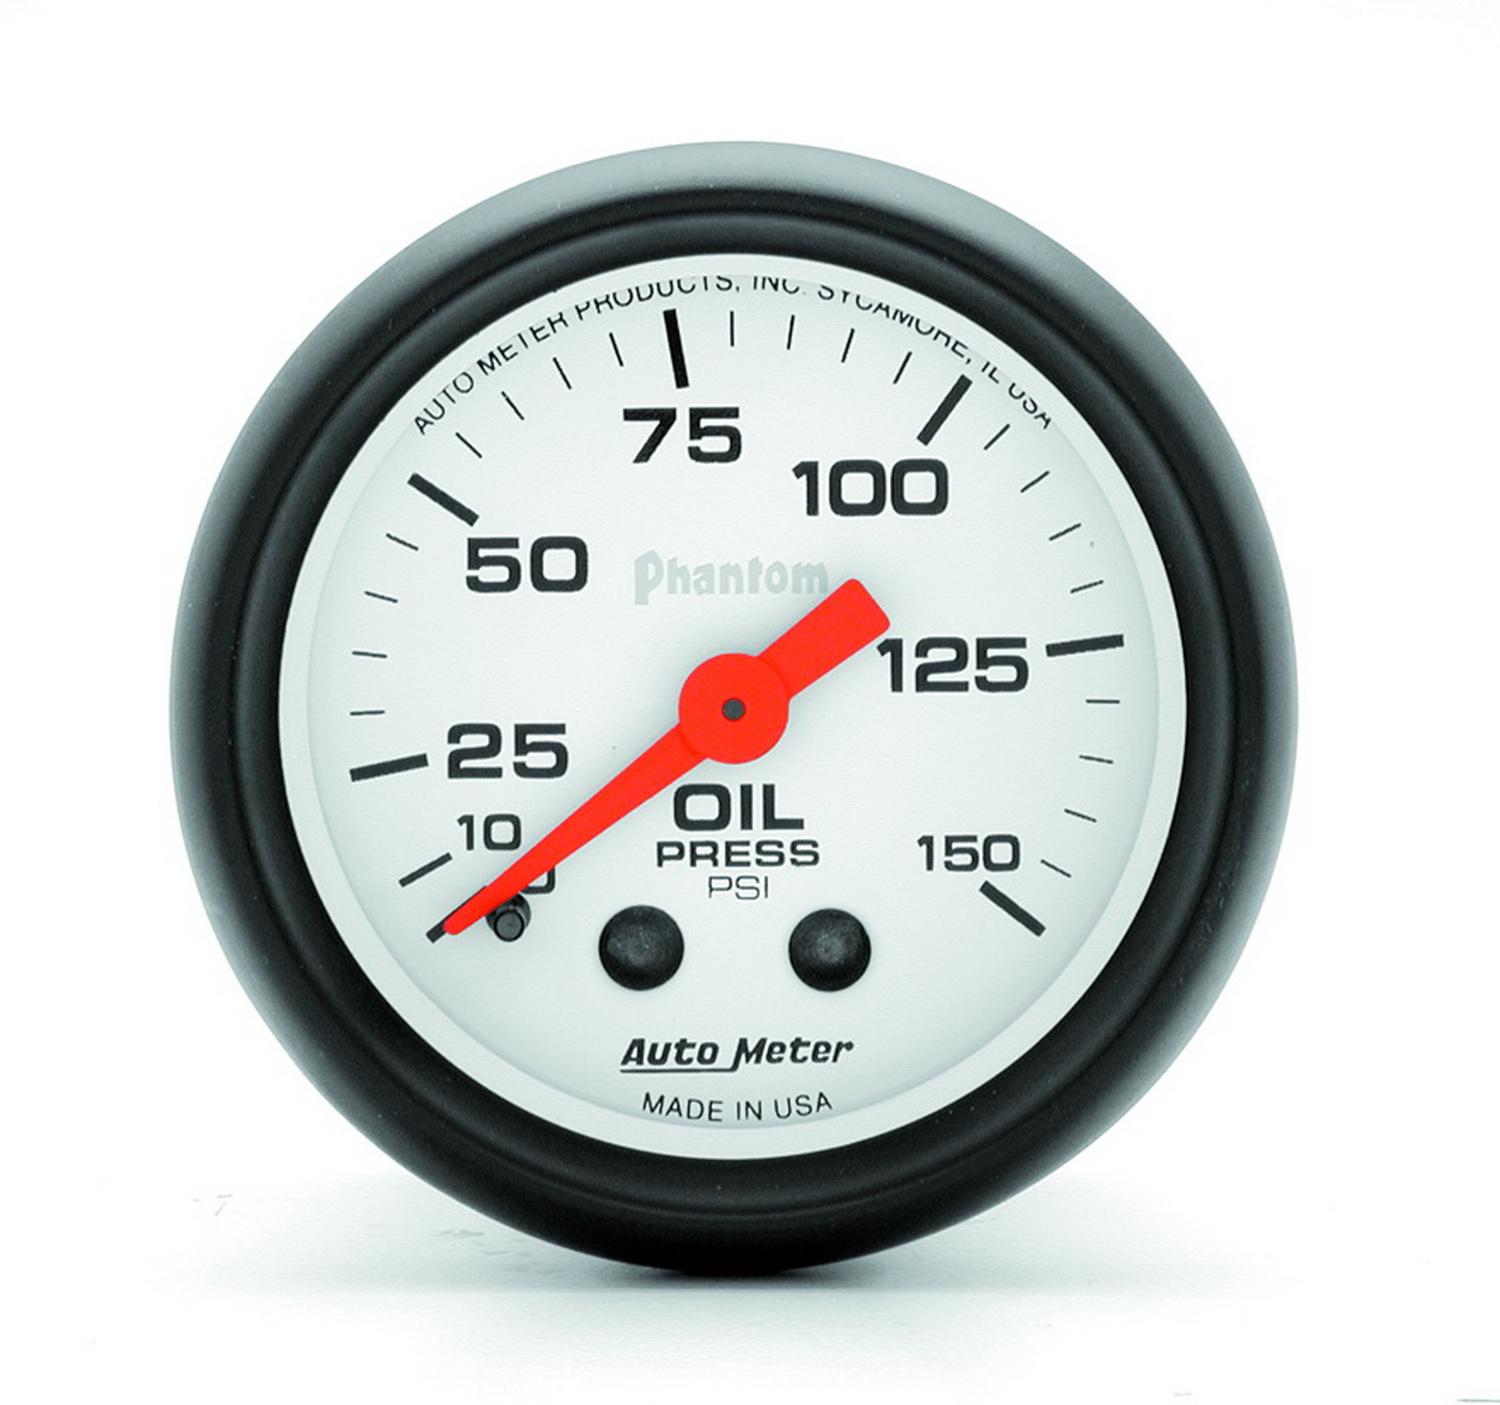 AutoMeter 5723 Phantom Mechanical Oil Pressure Gauge; 2-1/16 in.; White Dial Face; Fluorescent Red Pointer; White Incandescent Lighting; Mechanical; 0-150 PSI;